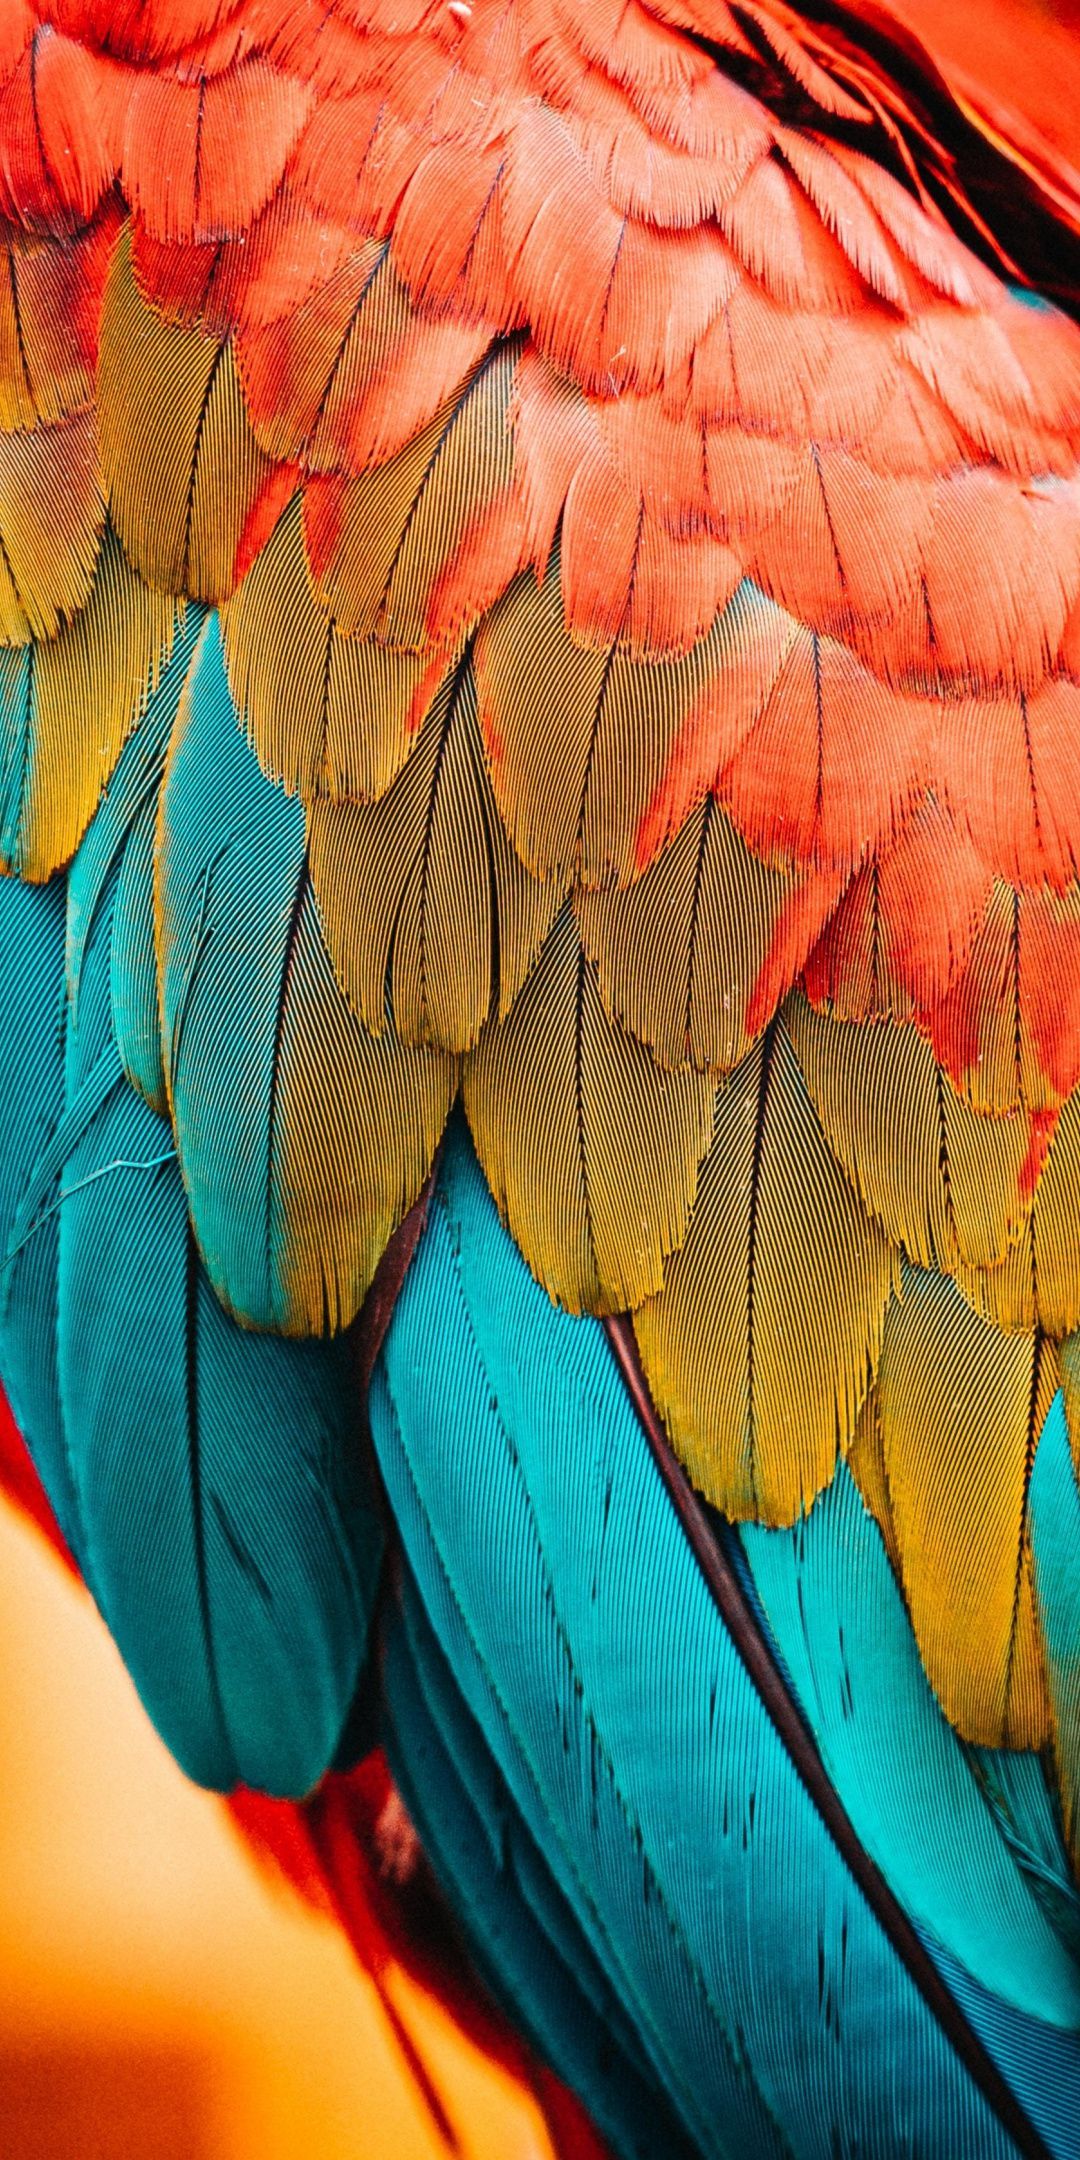 Colorful feathers, parrot, birds, close up wallpaper. Parrot wallpaper, Patterns in nature, Feather wallpaper